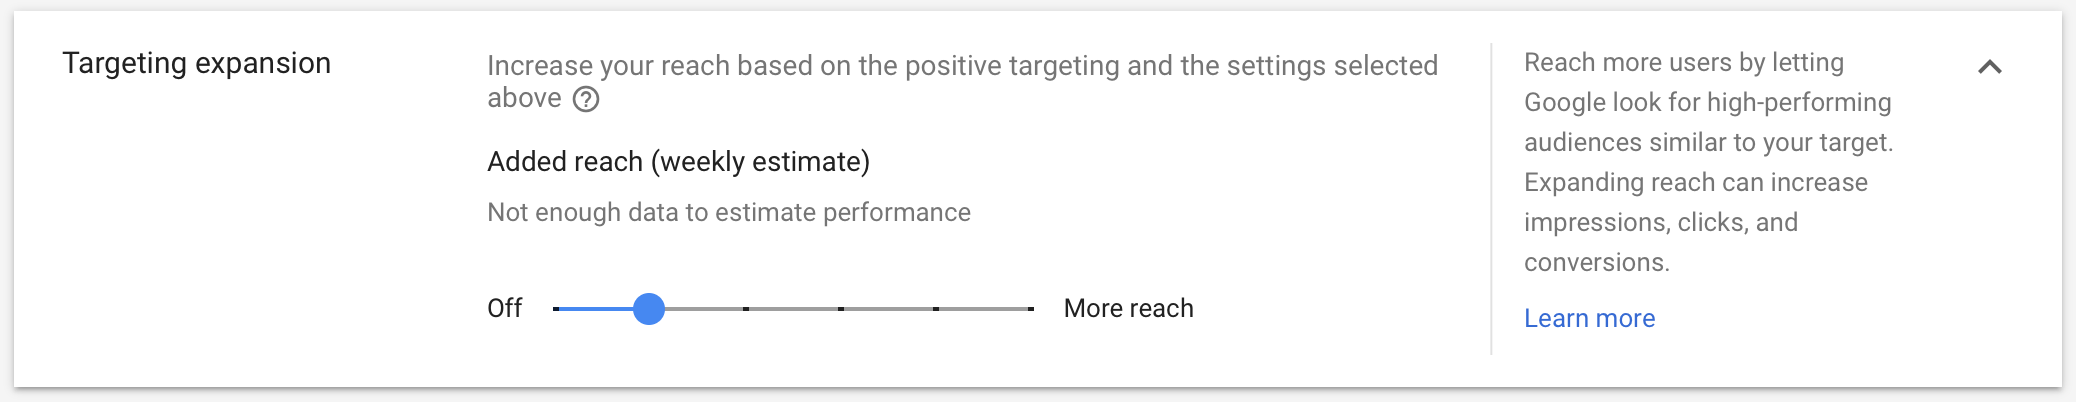 Targeting Expansion in Gogle Ads